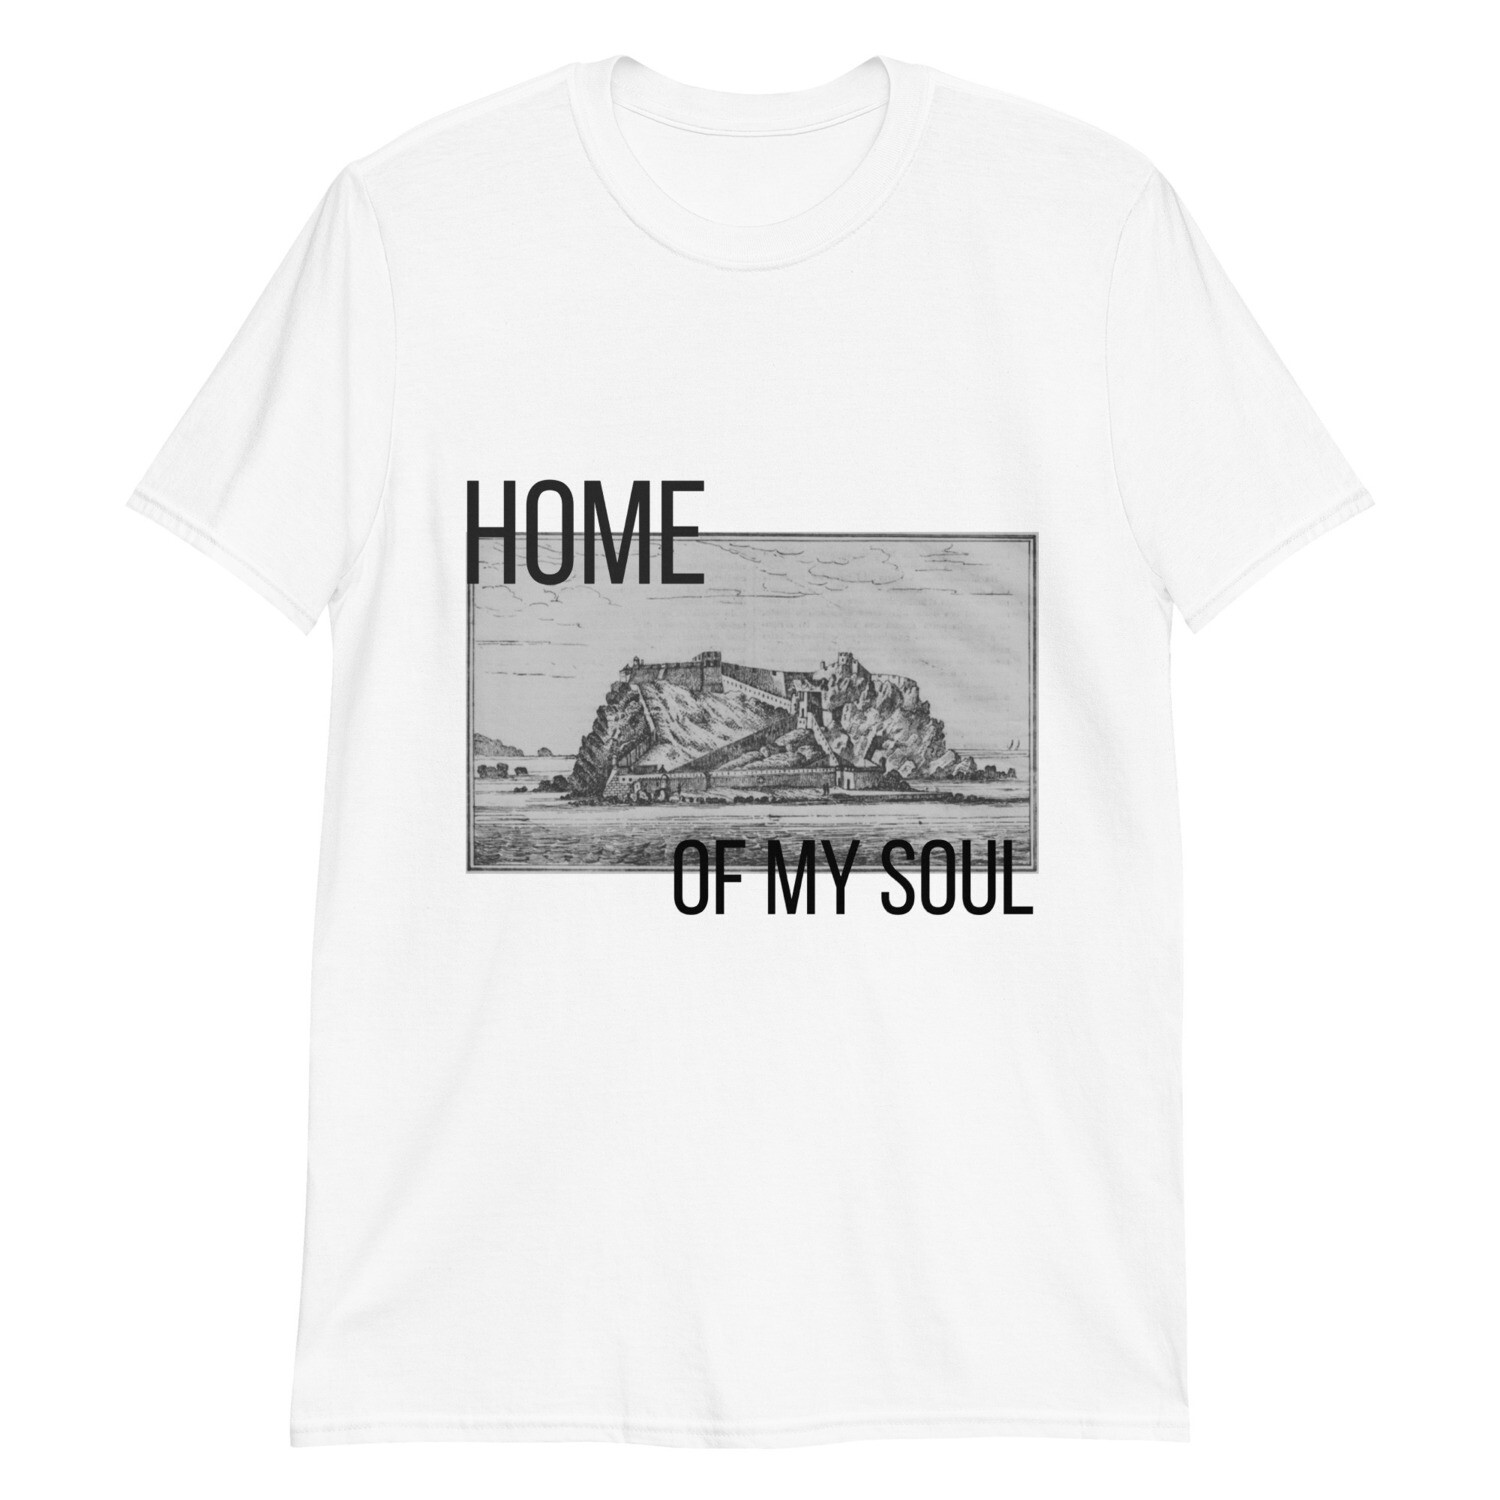 Home of my soul - (Shirt / unisex)